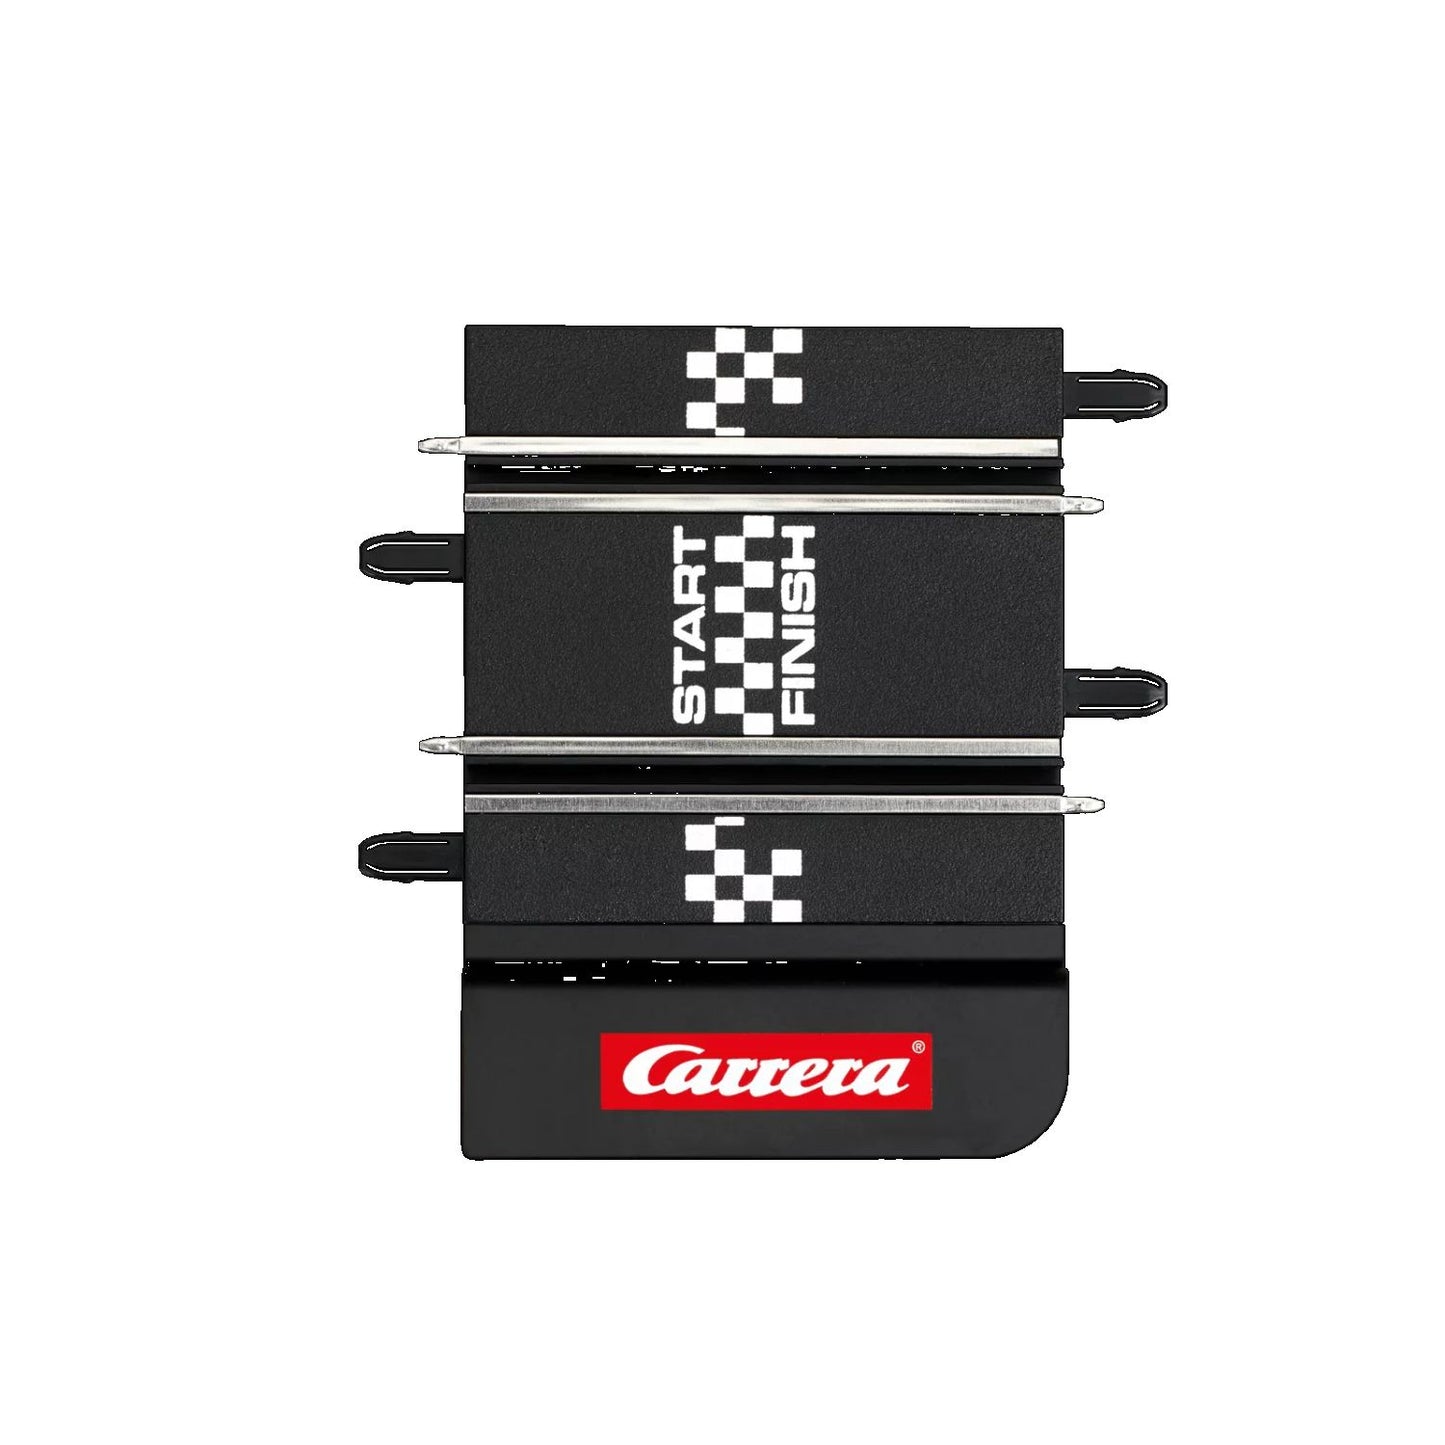 Carrera Connecting Section For 2017 Sets Or Newer